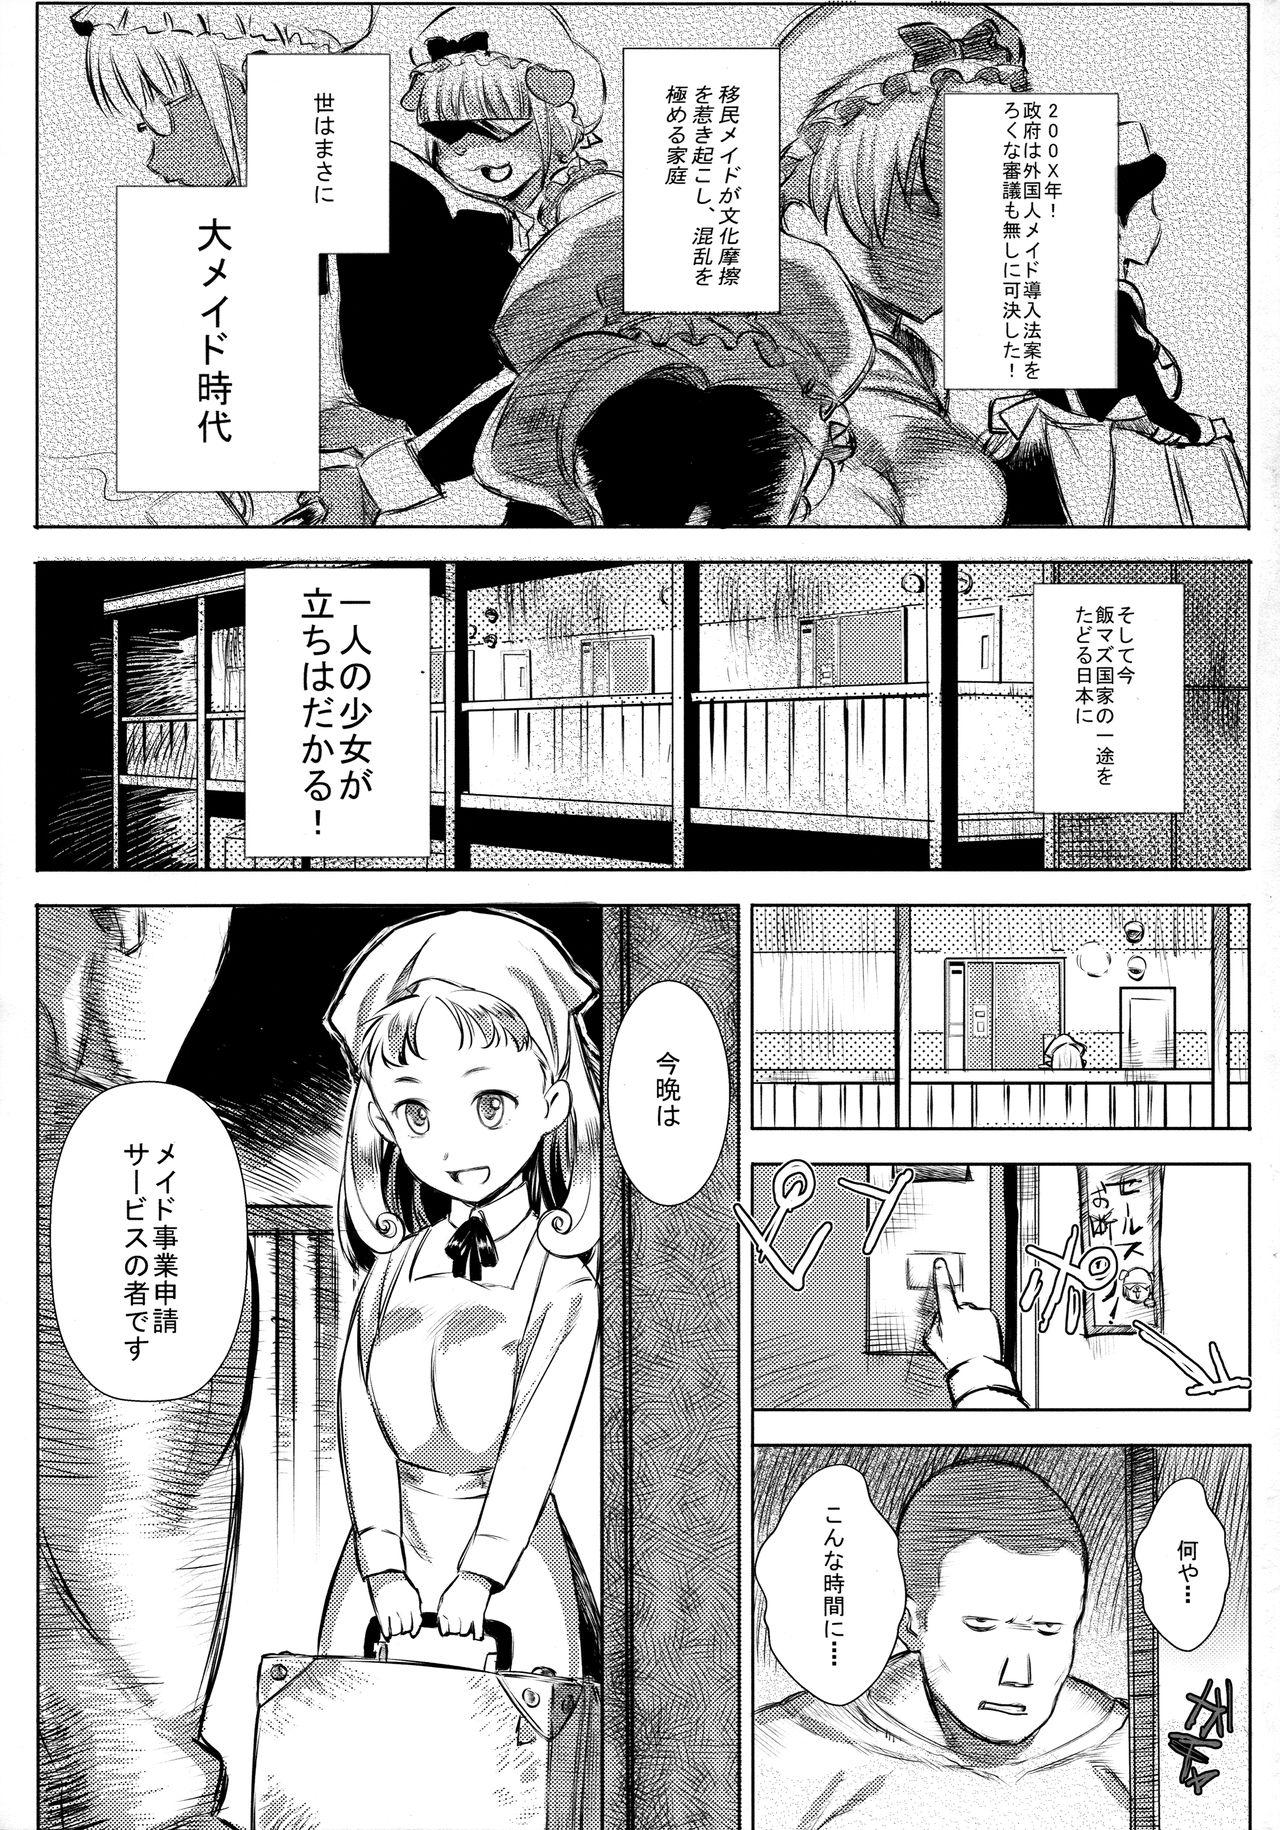 Longhair Yousei Maid Silkie - Original Solo Female - Page 3